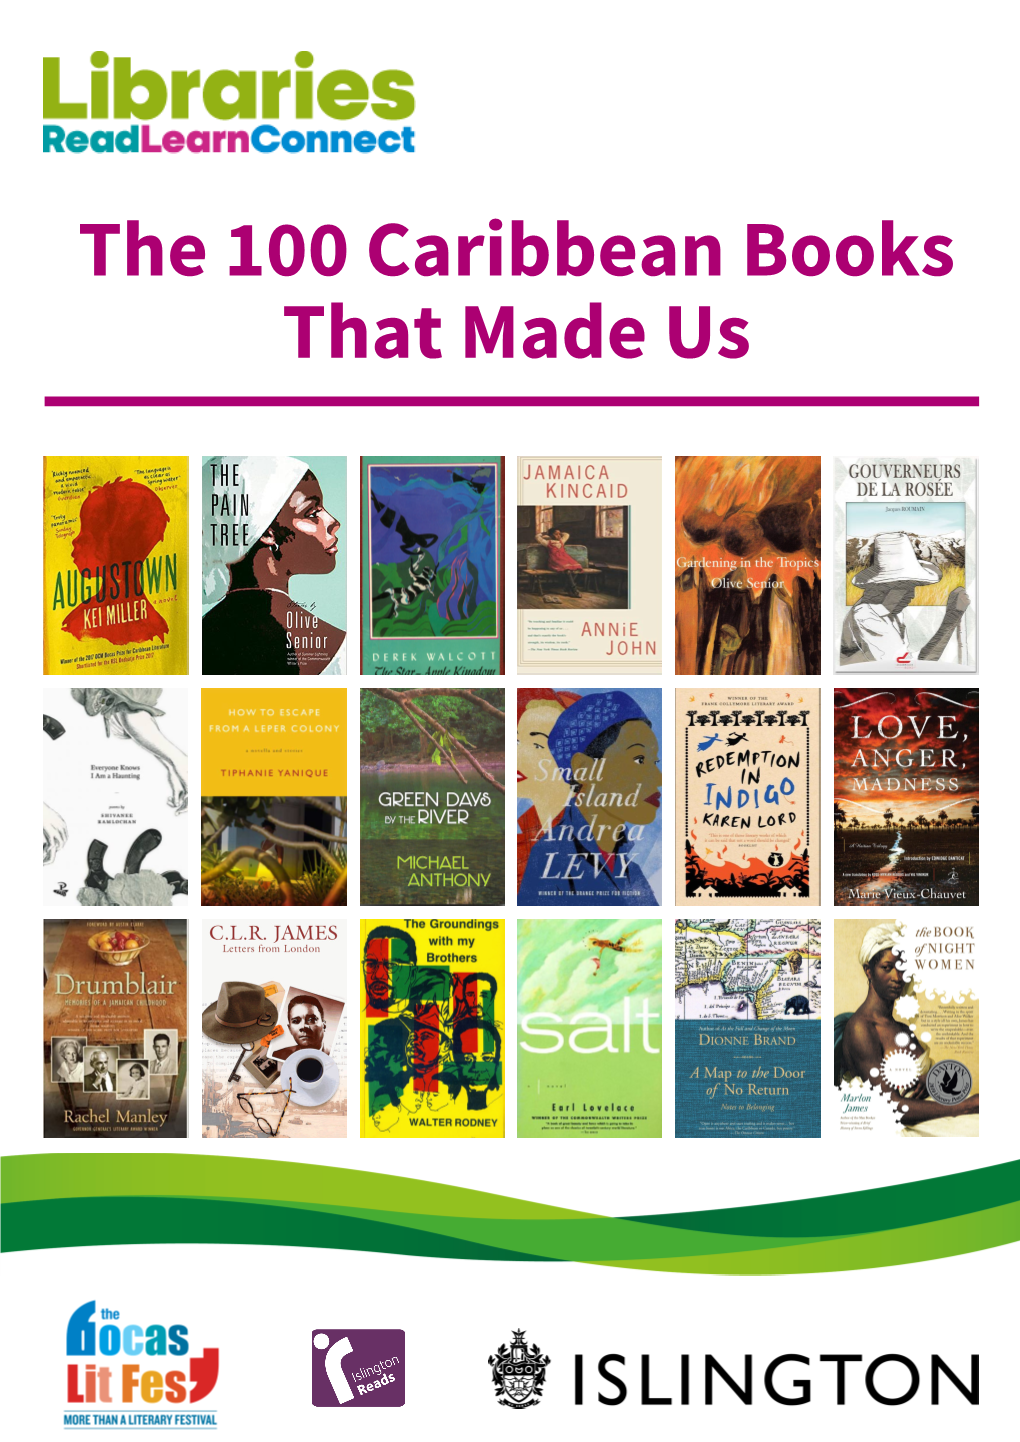 The 100 Caribbean Books That Made Us